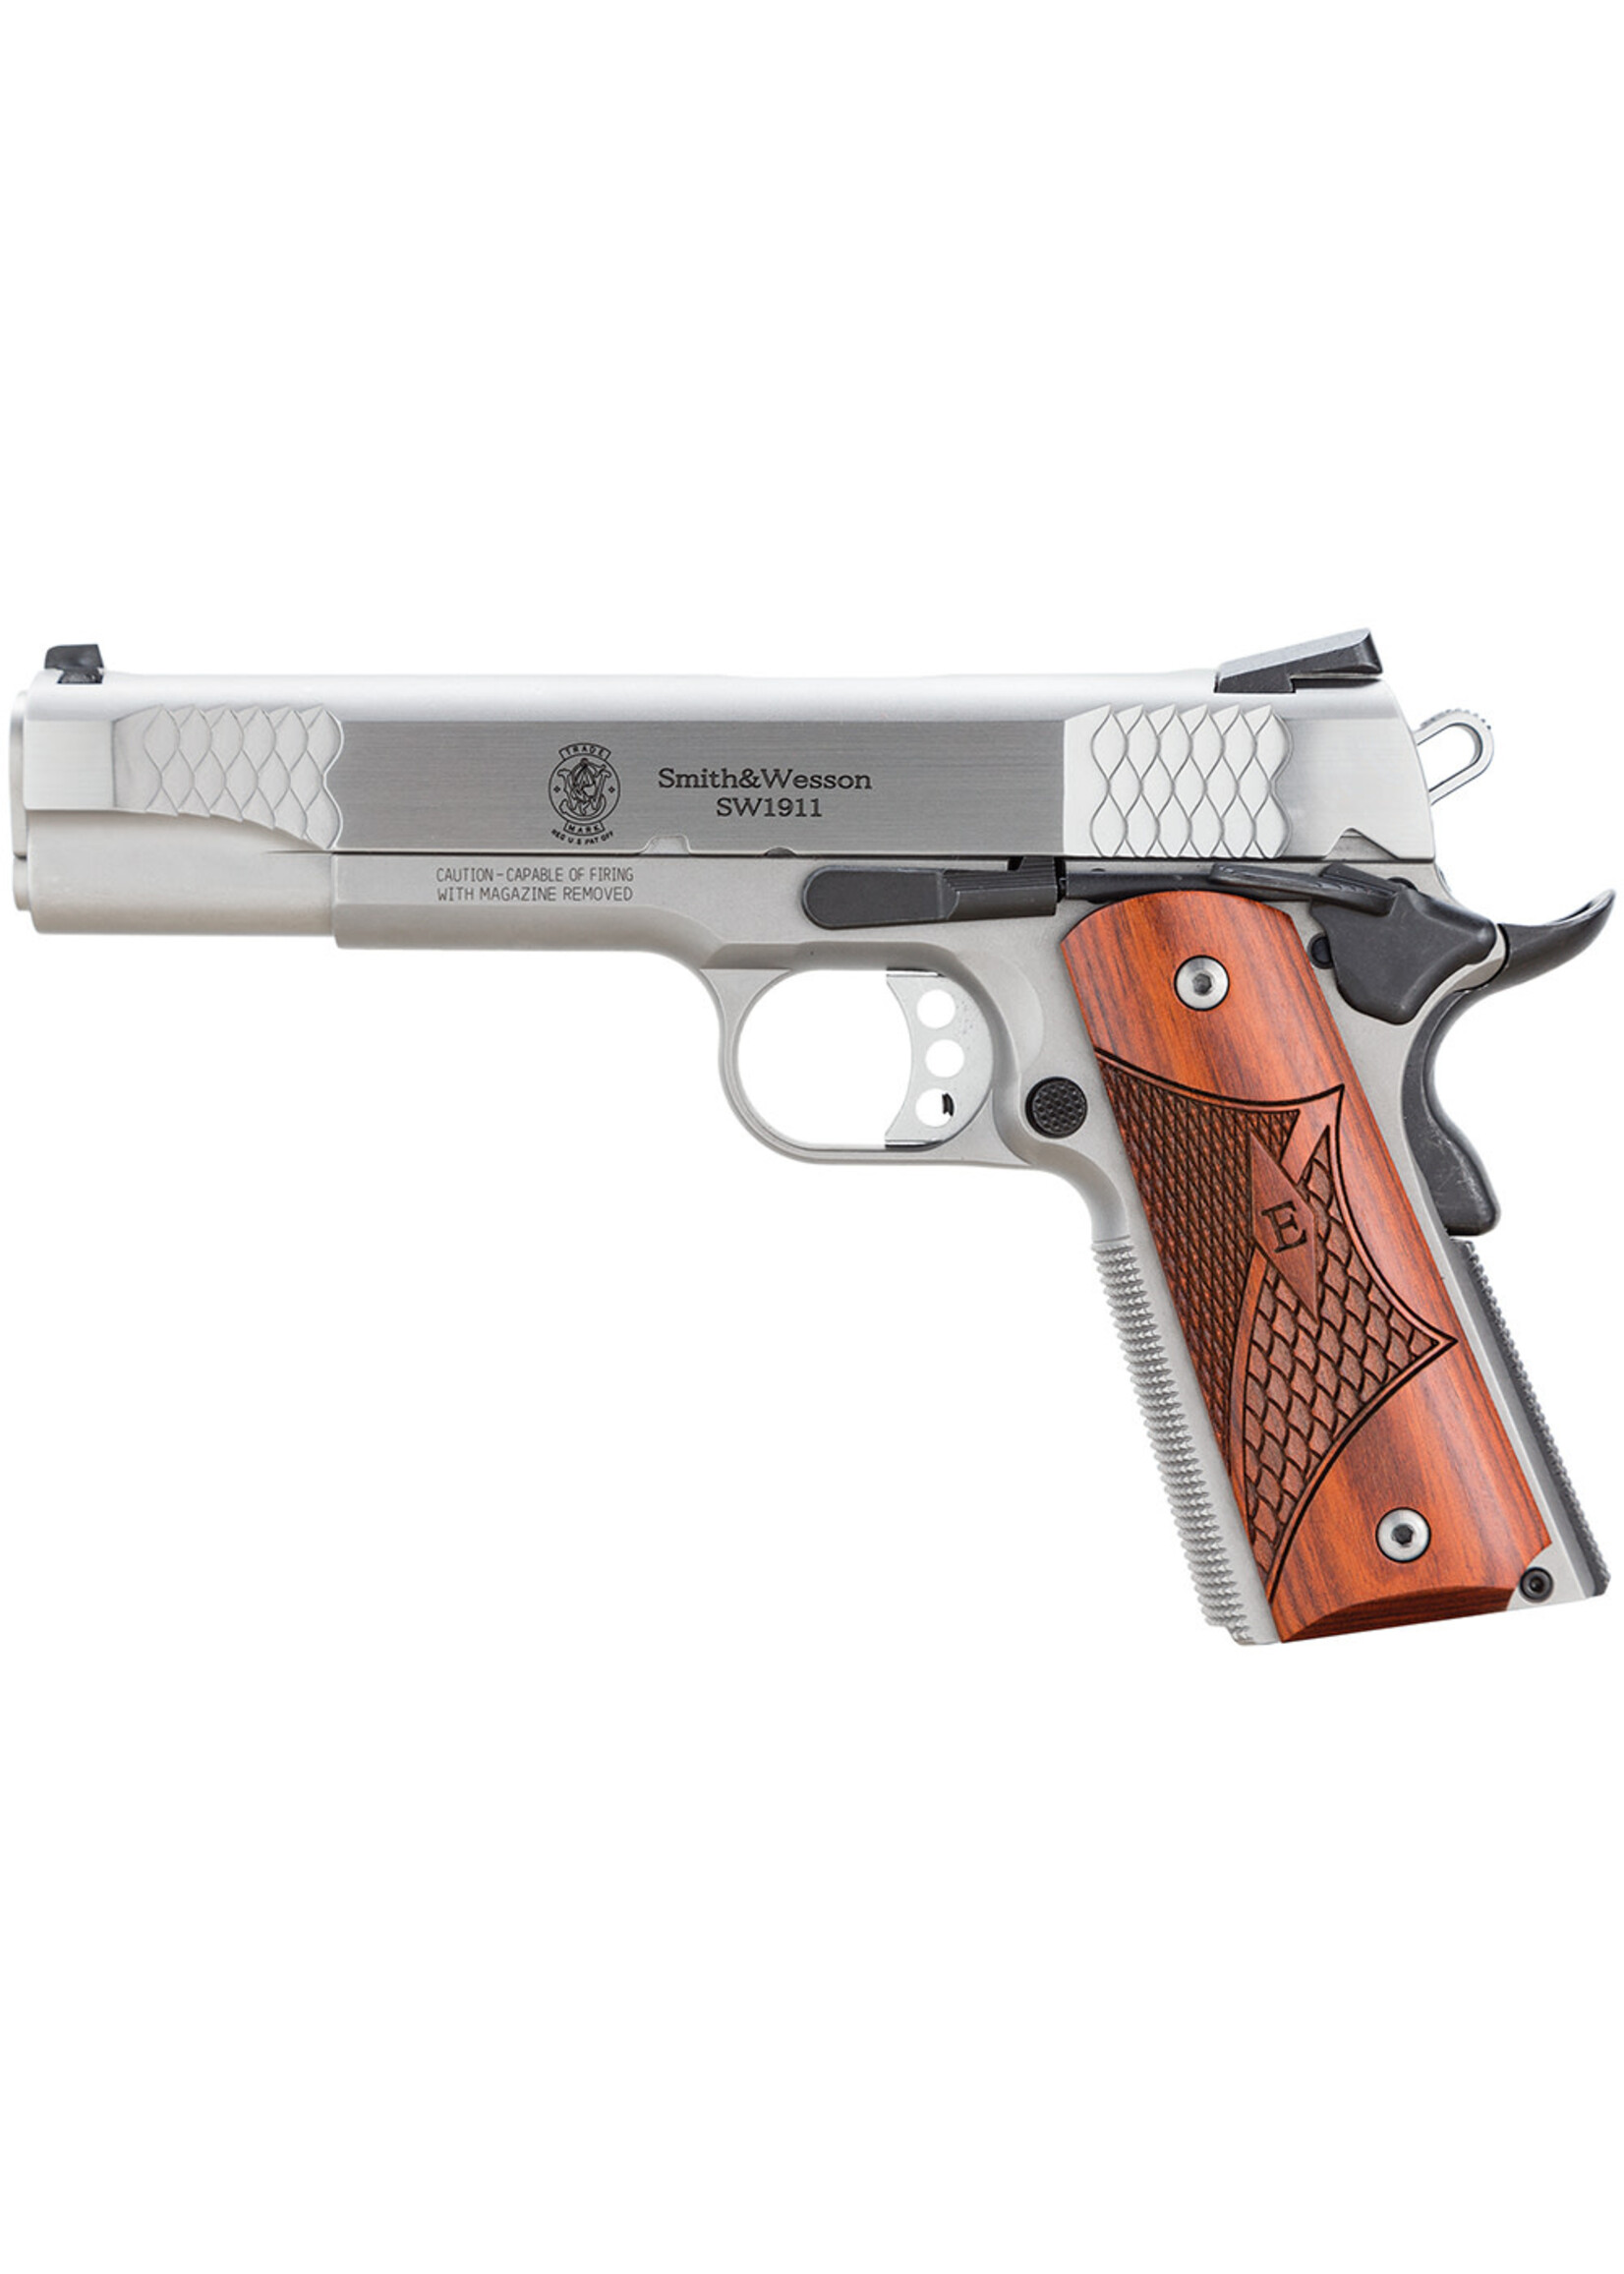 Smith and Wesson (S&W) Smith & Wesson 108482 1911 E-Series 45 ACP 5" Barrel 8+1, Satin Stainless Steel Frame & Slide, Laminate Wood E Series Grip, Manual Grip & Thumb Safety